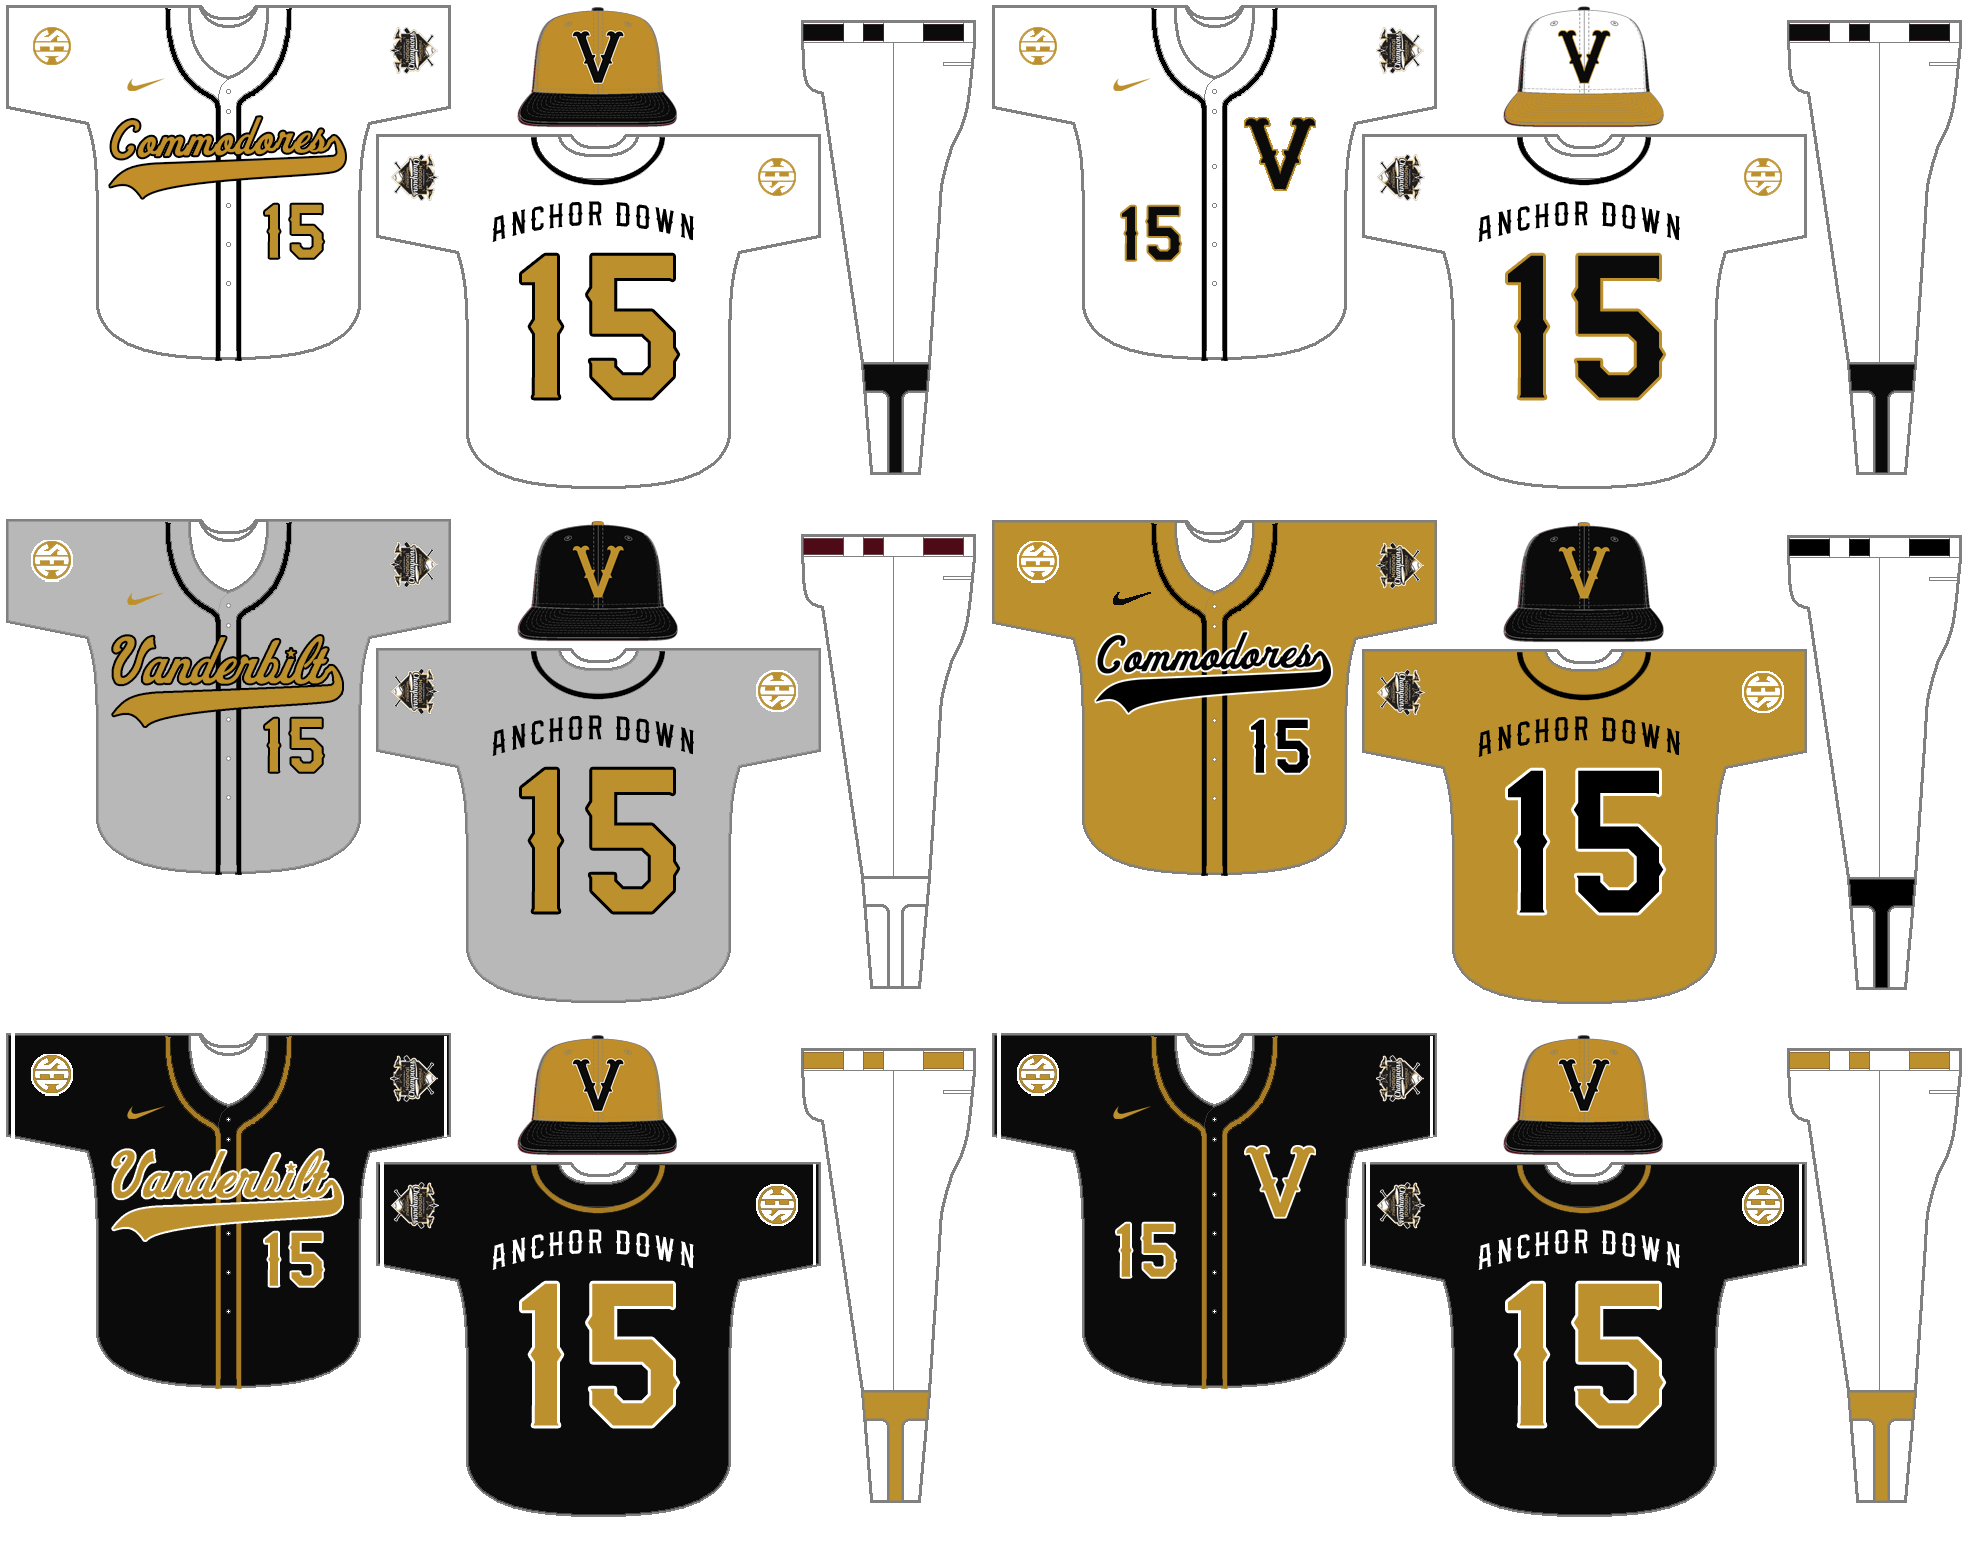 Black and Gold Sports Logo - SEC Baseball- 2015 Edition - Page 2 - Concepts - Chris Creamer's ...